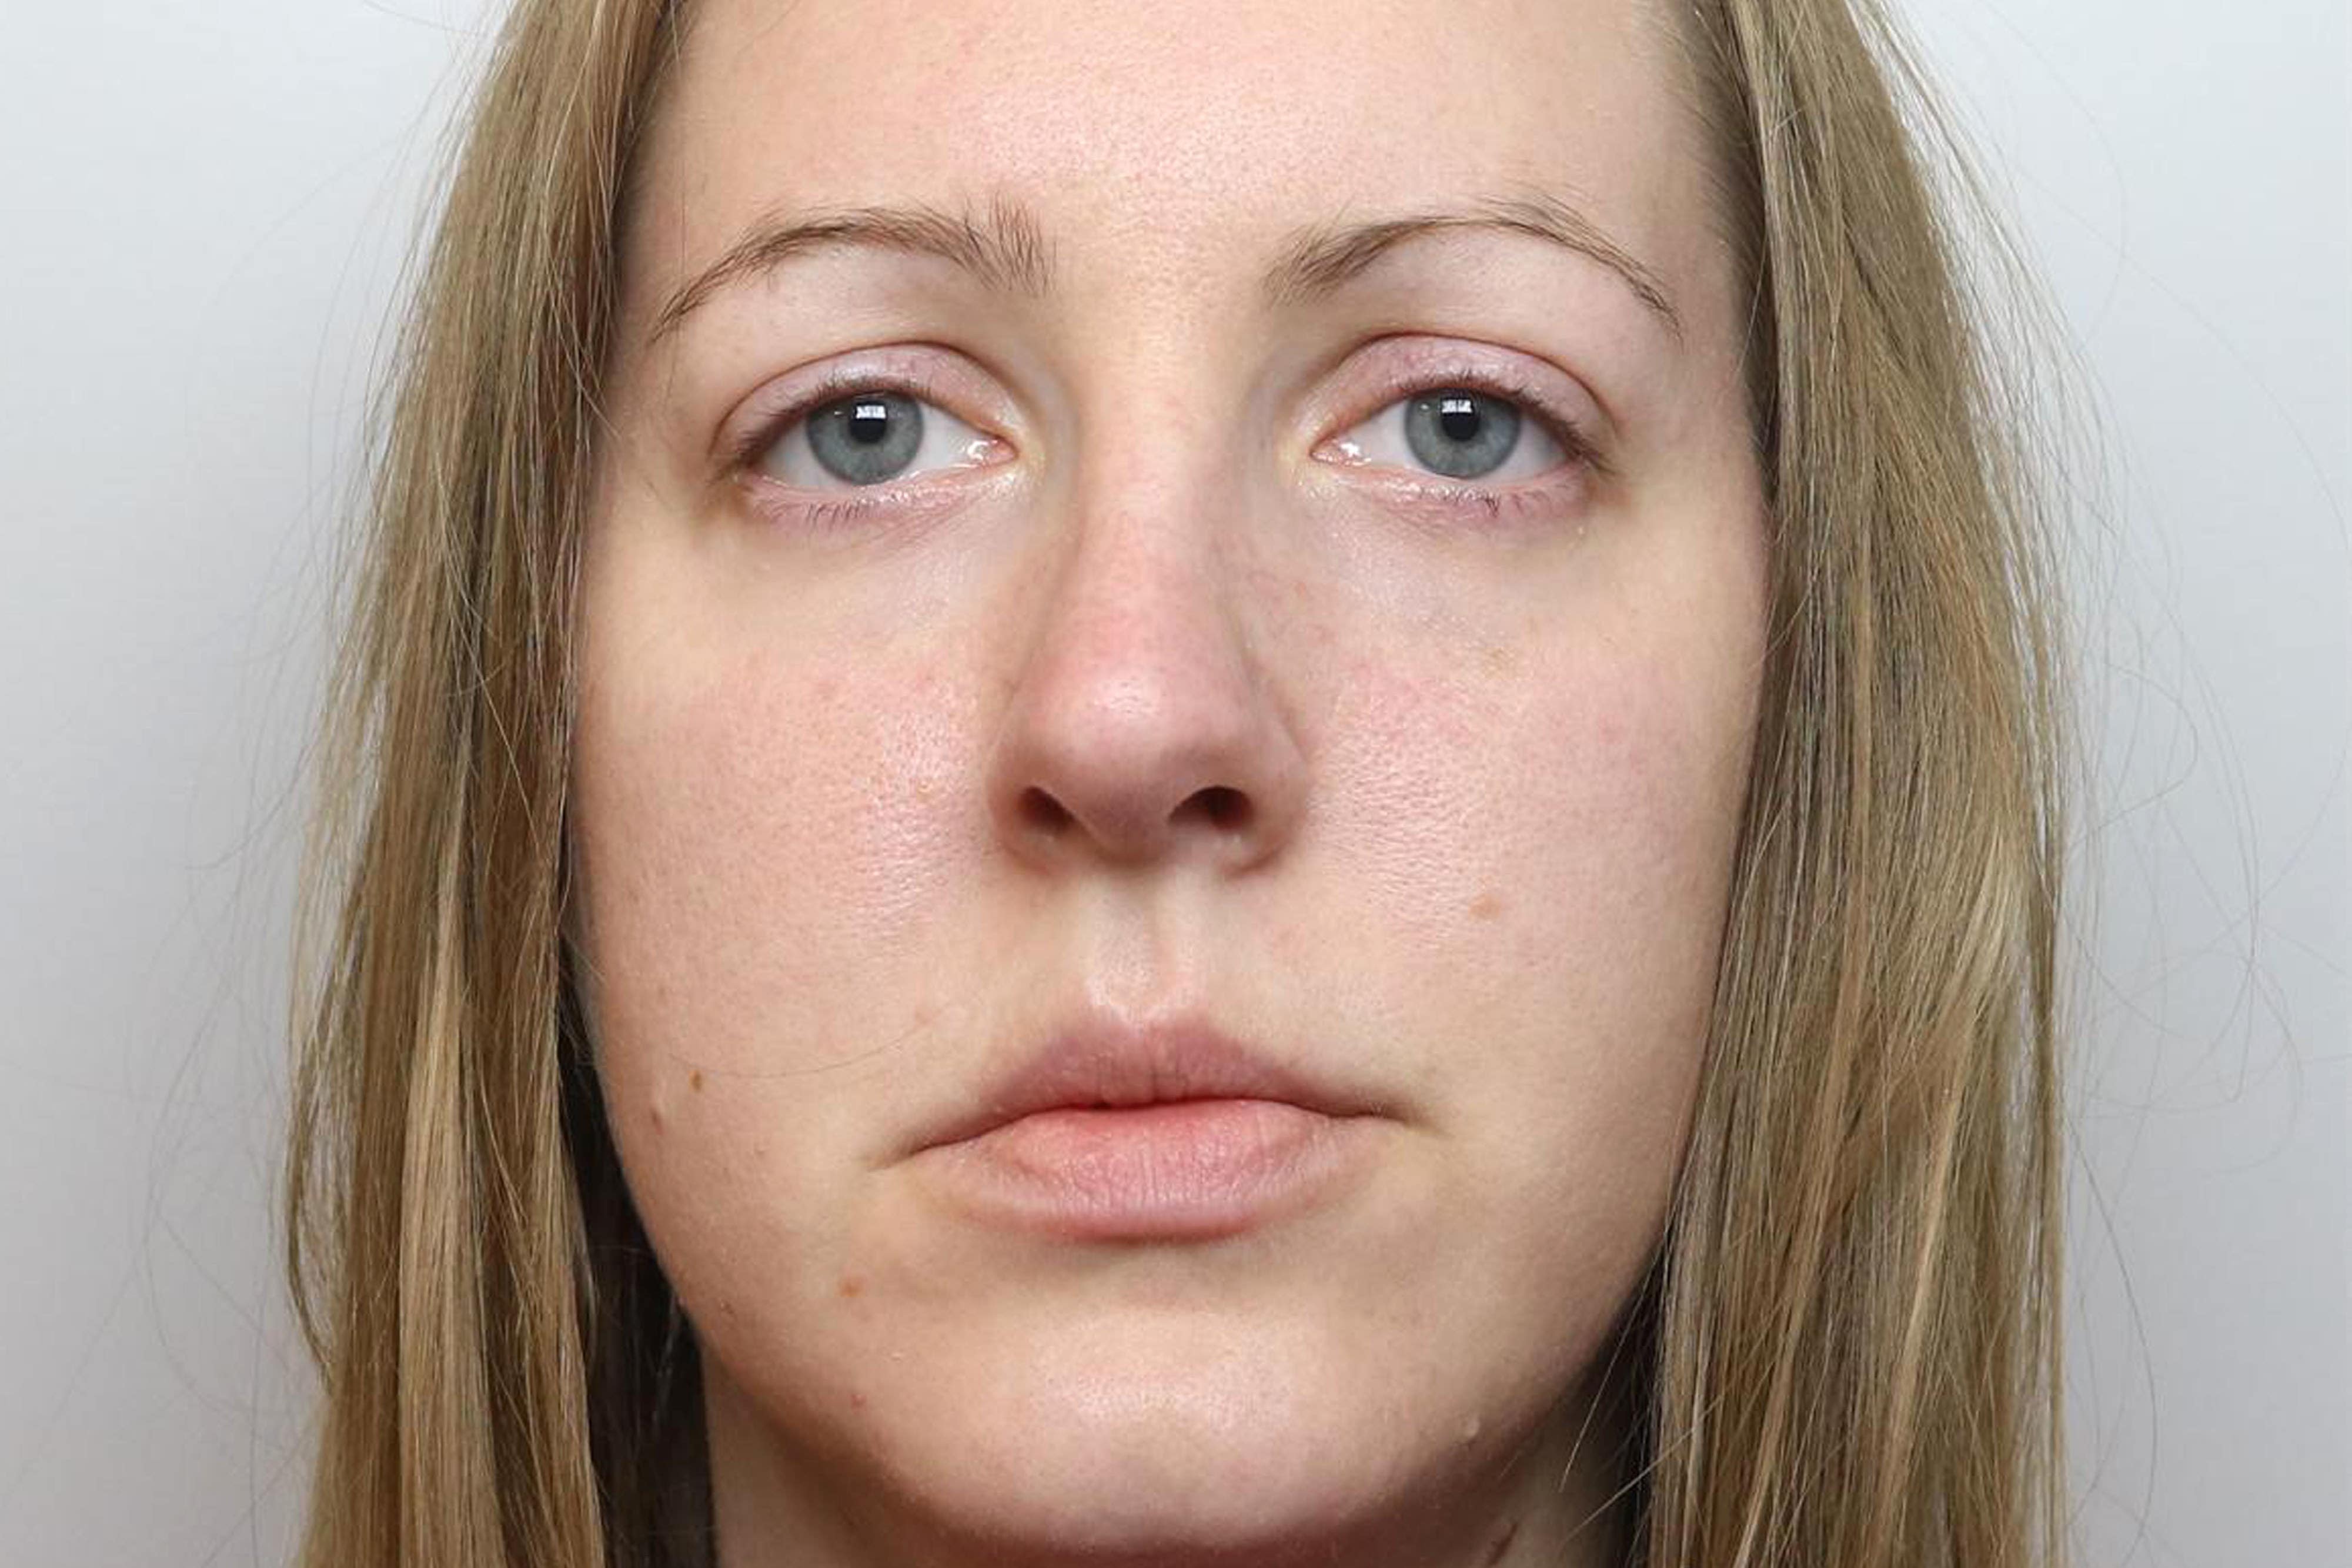 Prosecutors are deciding whether to seek a retrial on attempted murder allegations against killer nurse Lucy Letby (Cheshire Police/PA)